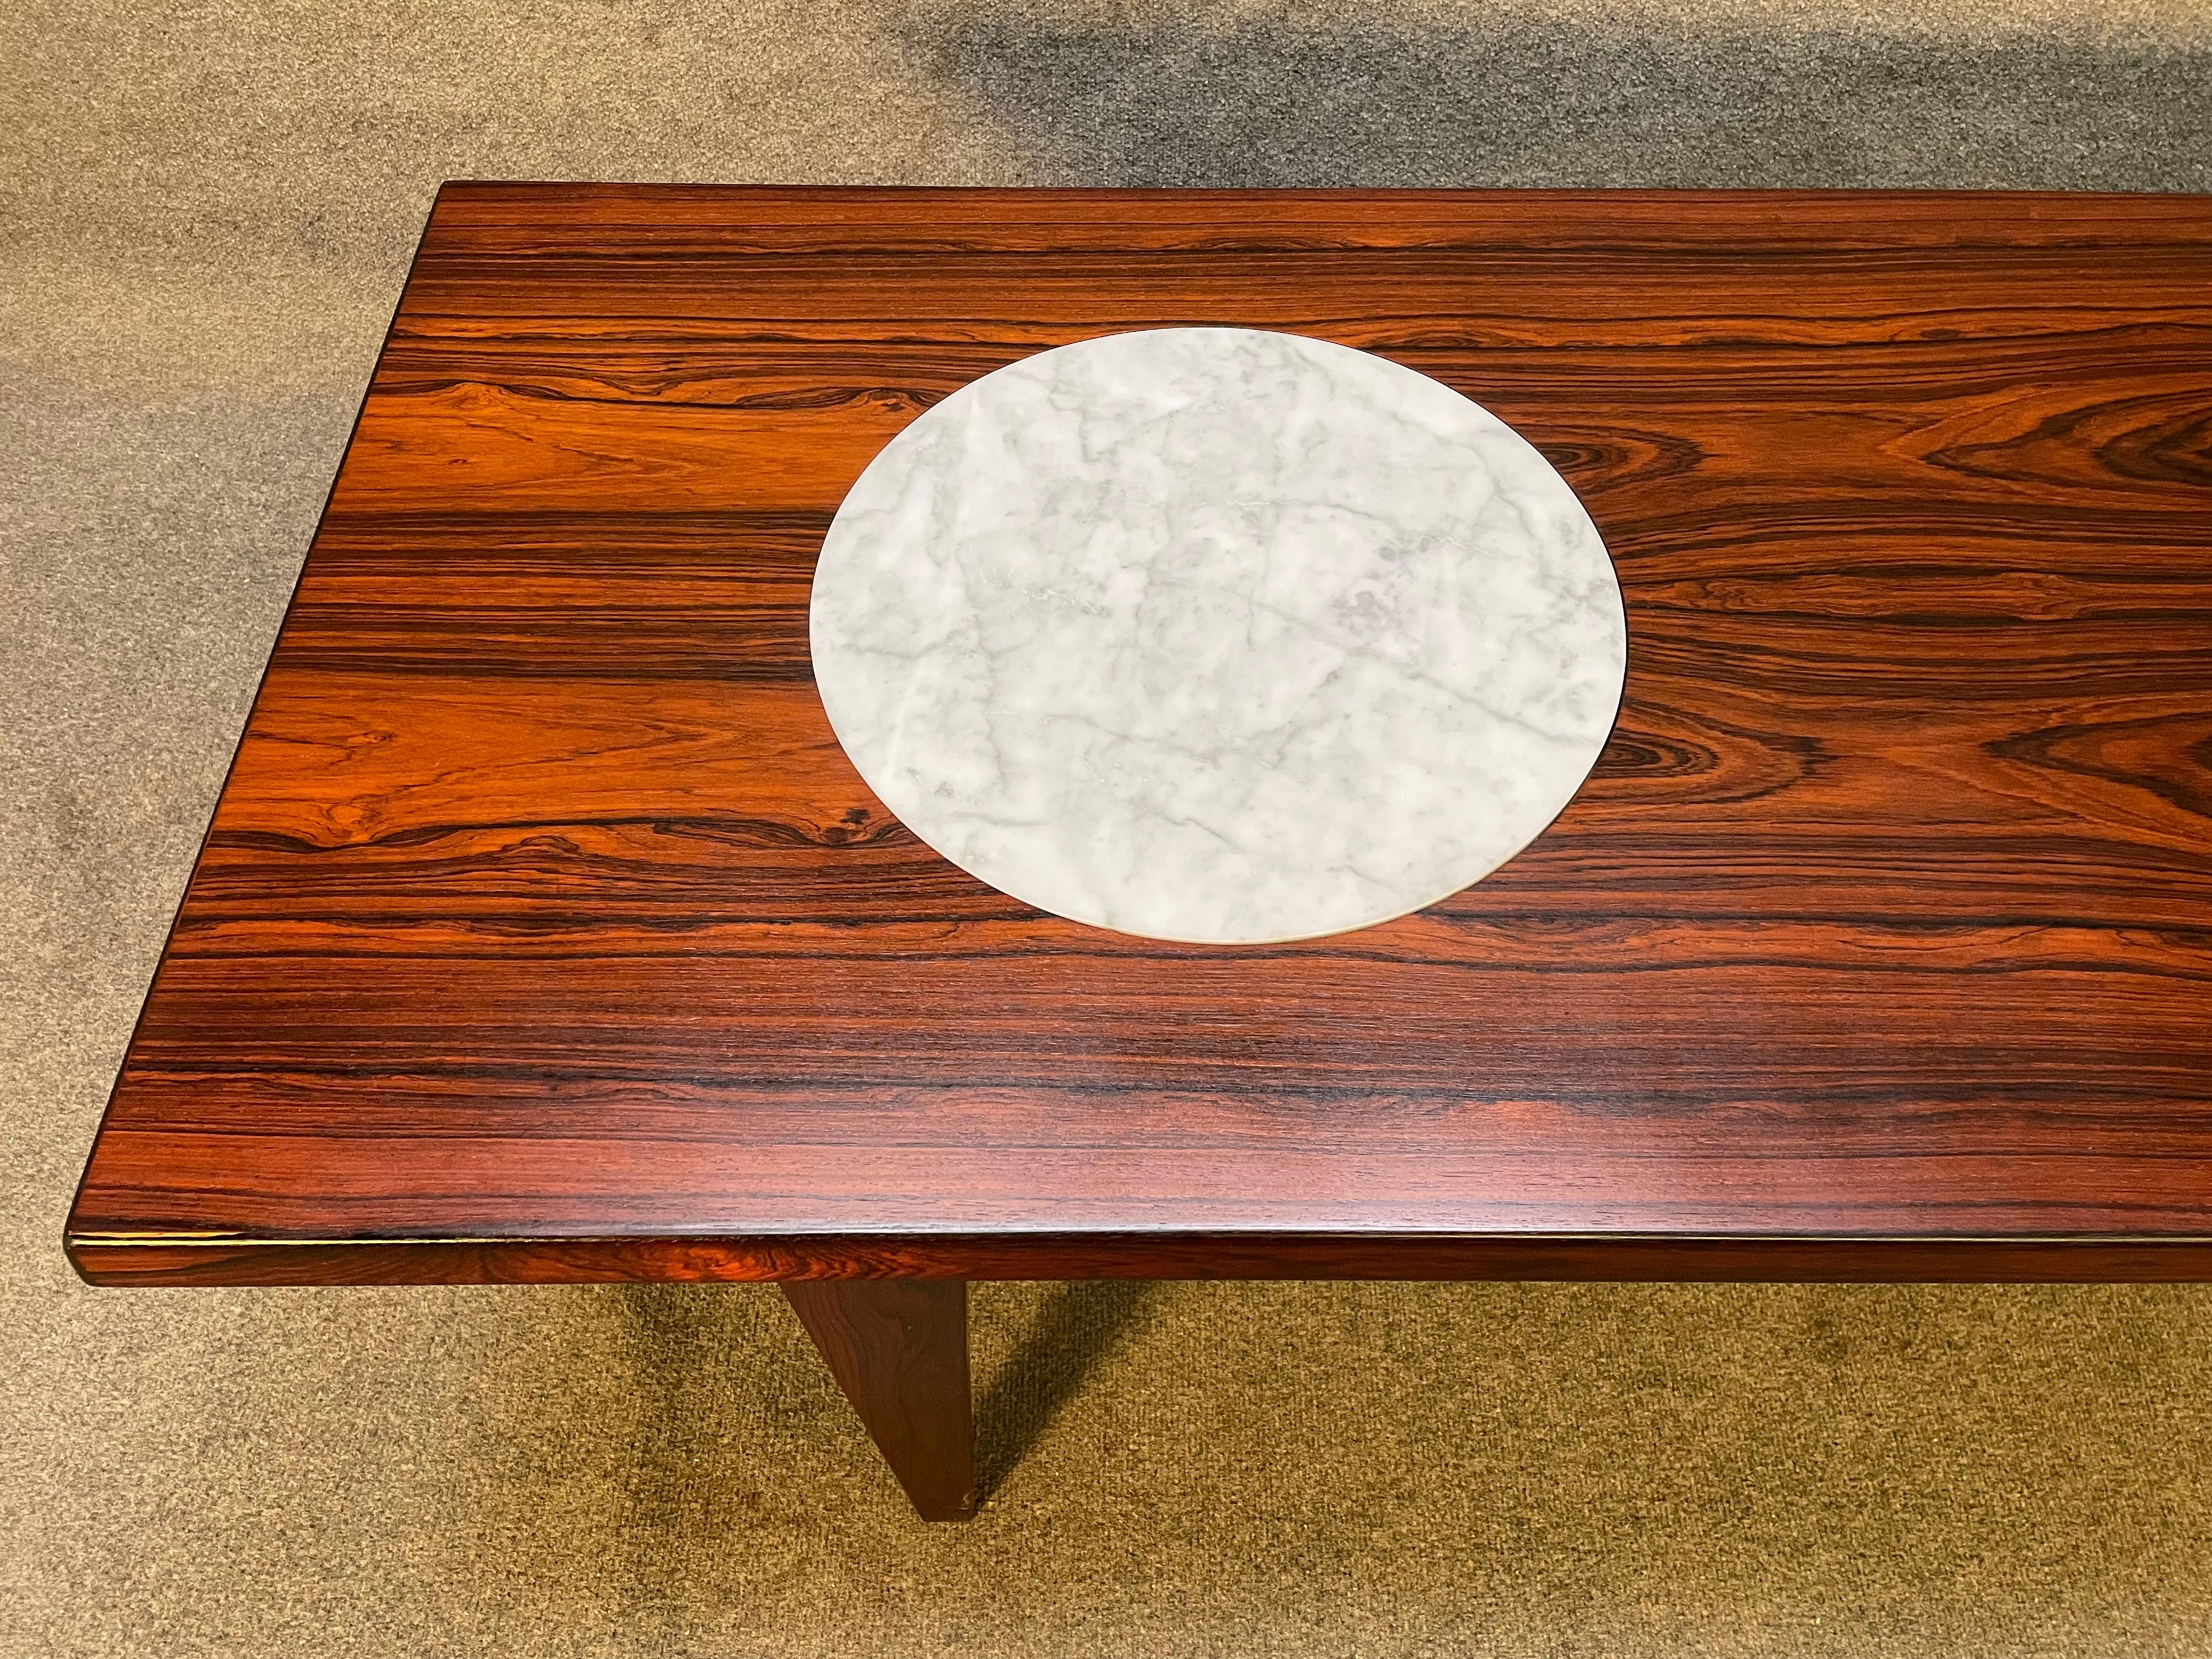 Vintage Danish Mid-Century Modern Rosewood and Marble Coffee Table For Sale 2